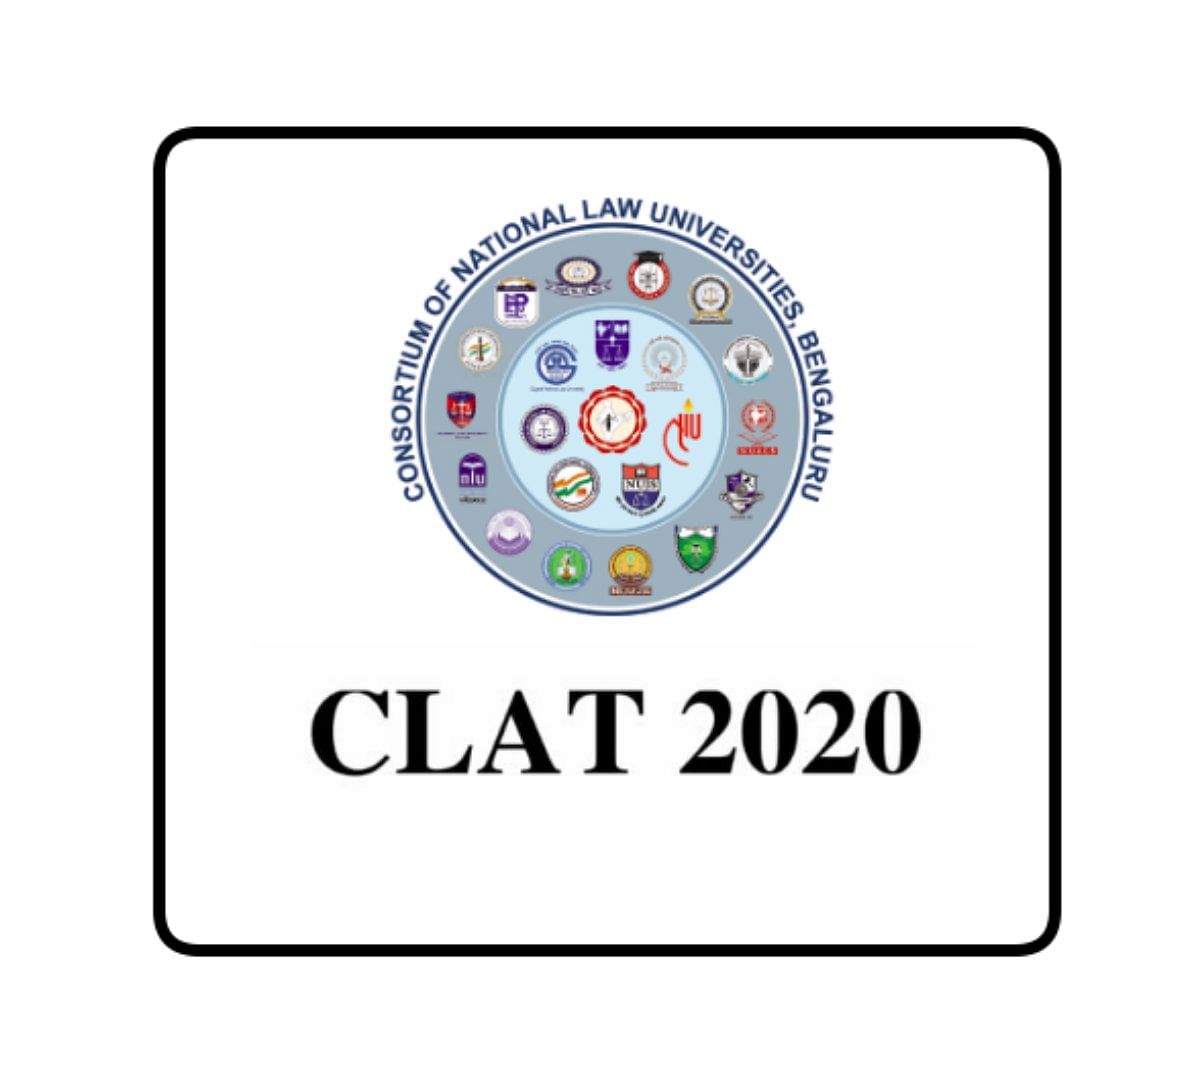 CLAT 2020: Going Through This Revised Exam Pattern will Help You Score Better Marks